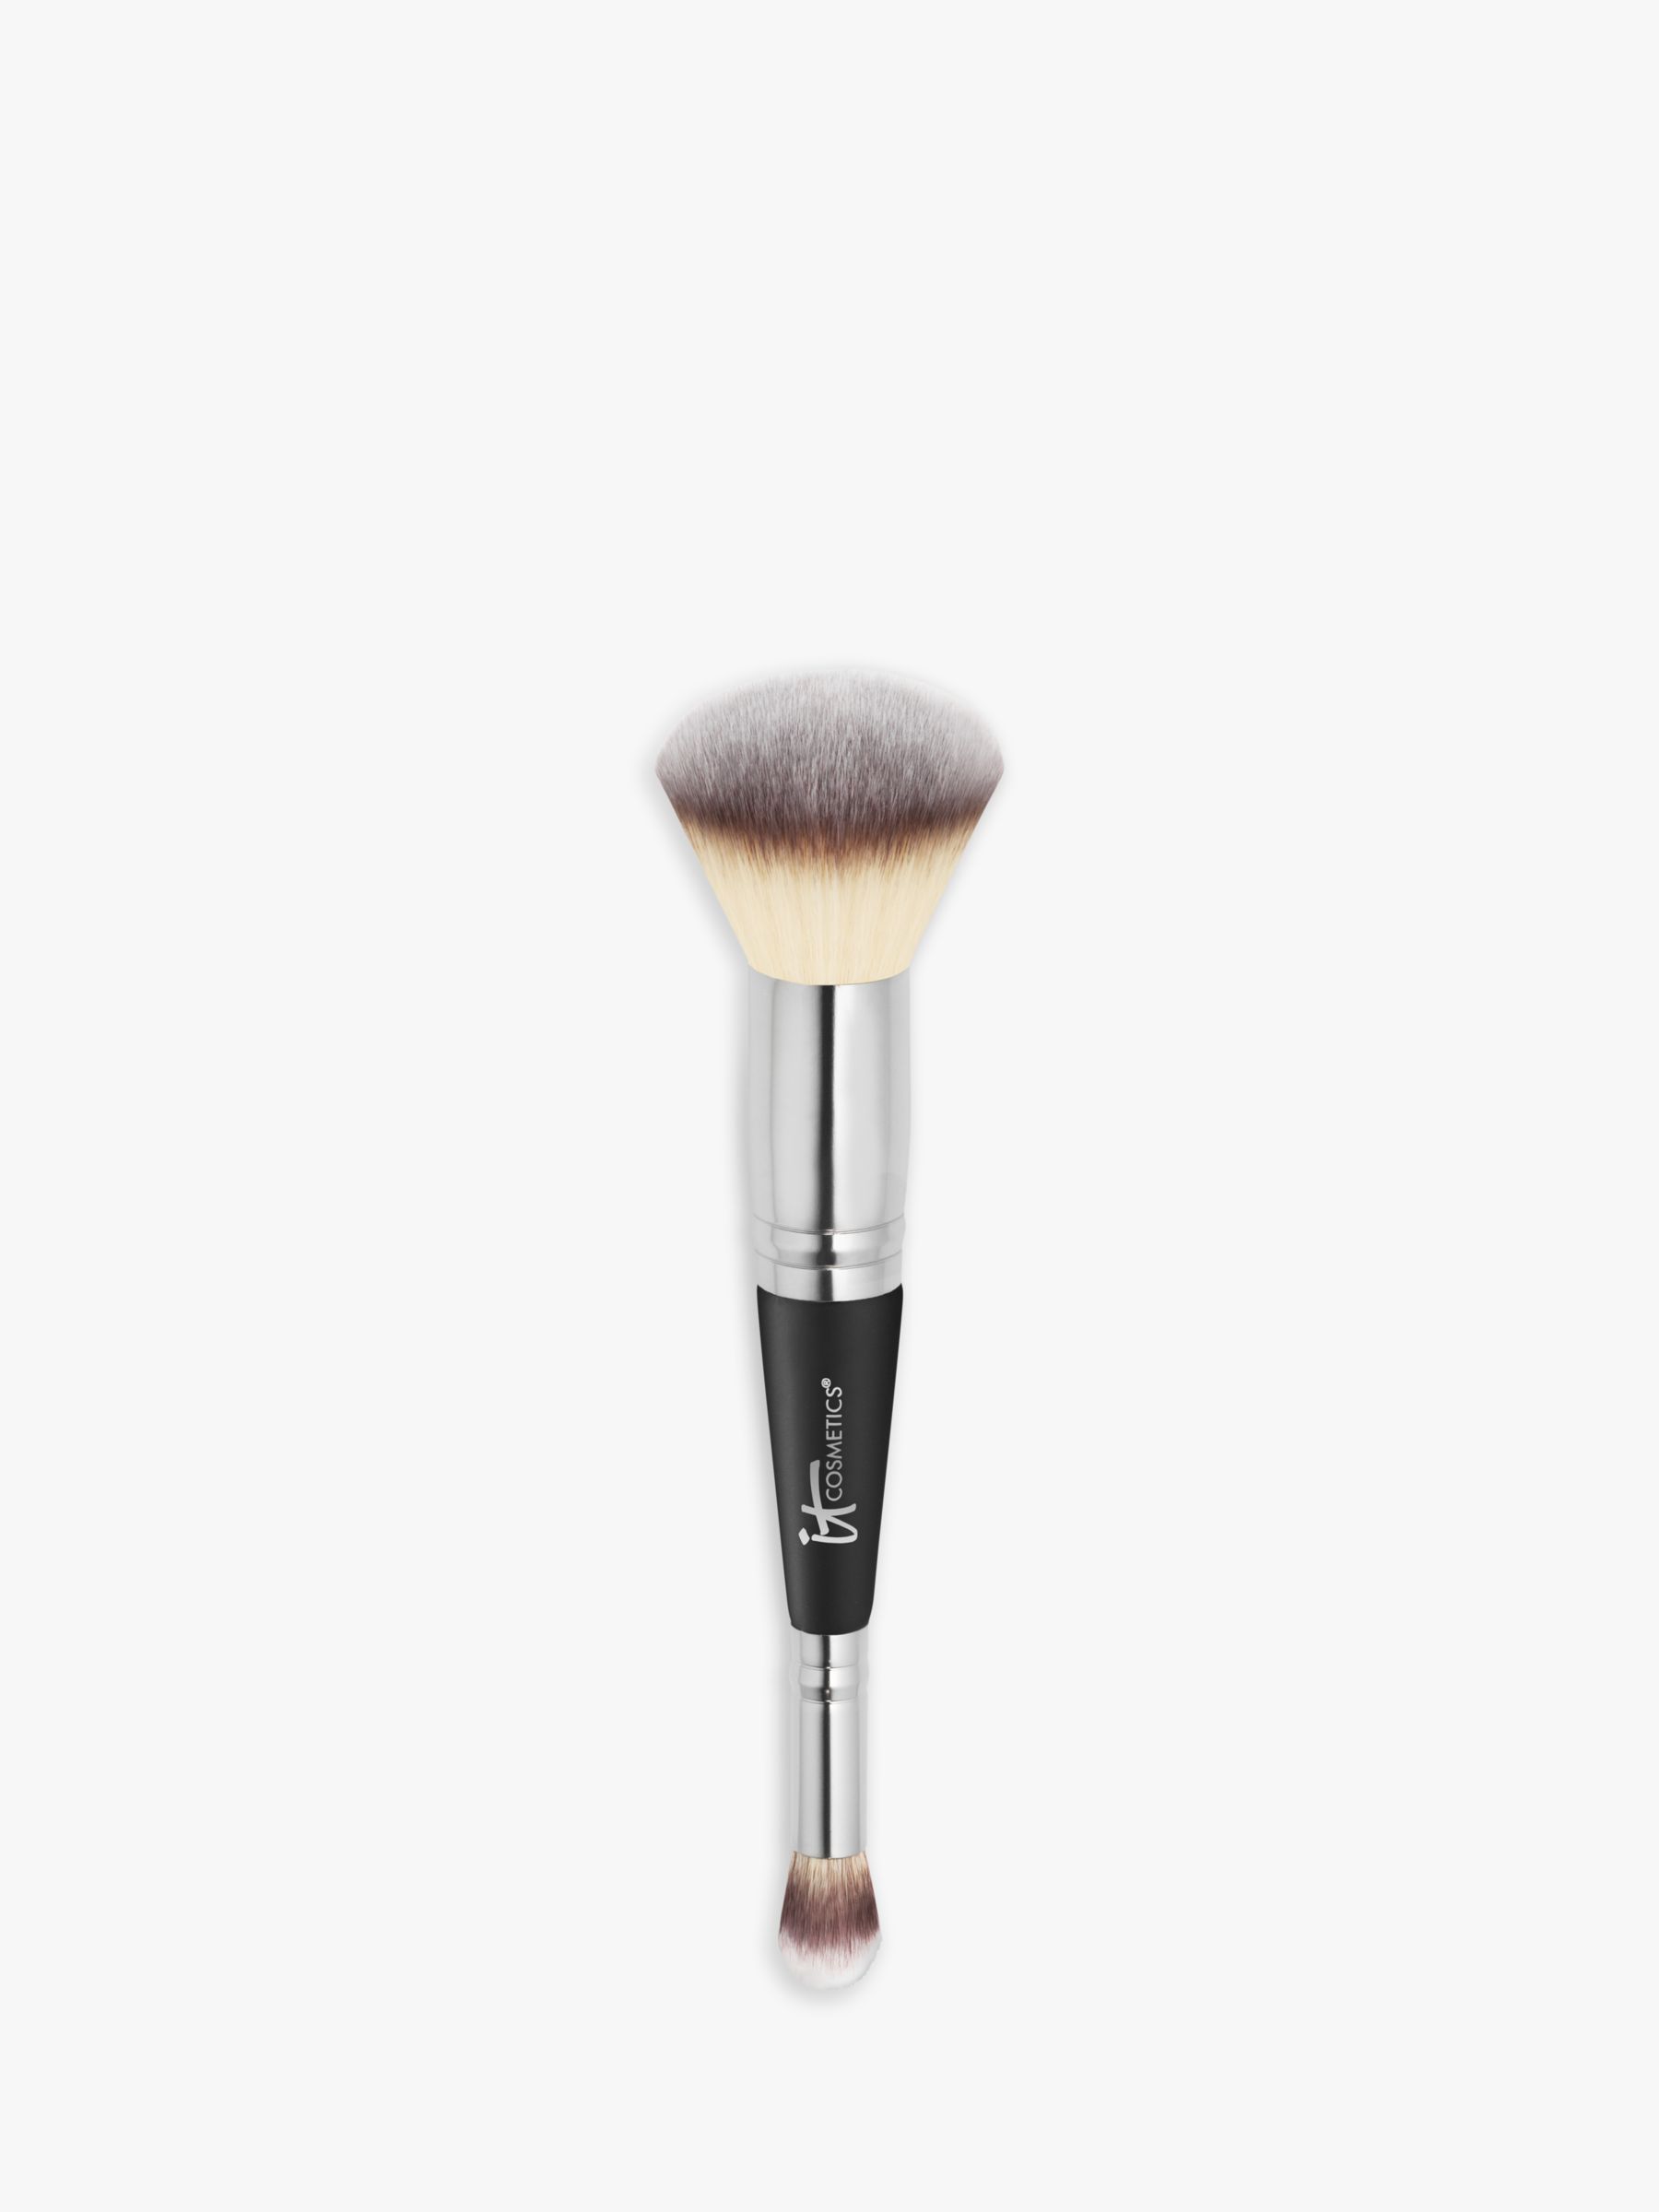 IT Cosmetics Heavenly Luxe Complexion Perfection Dual Foundation and Concealer Brush #7 1